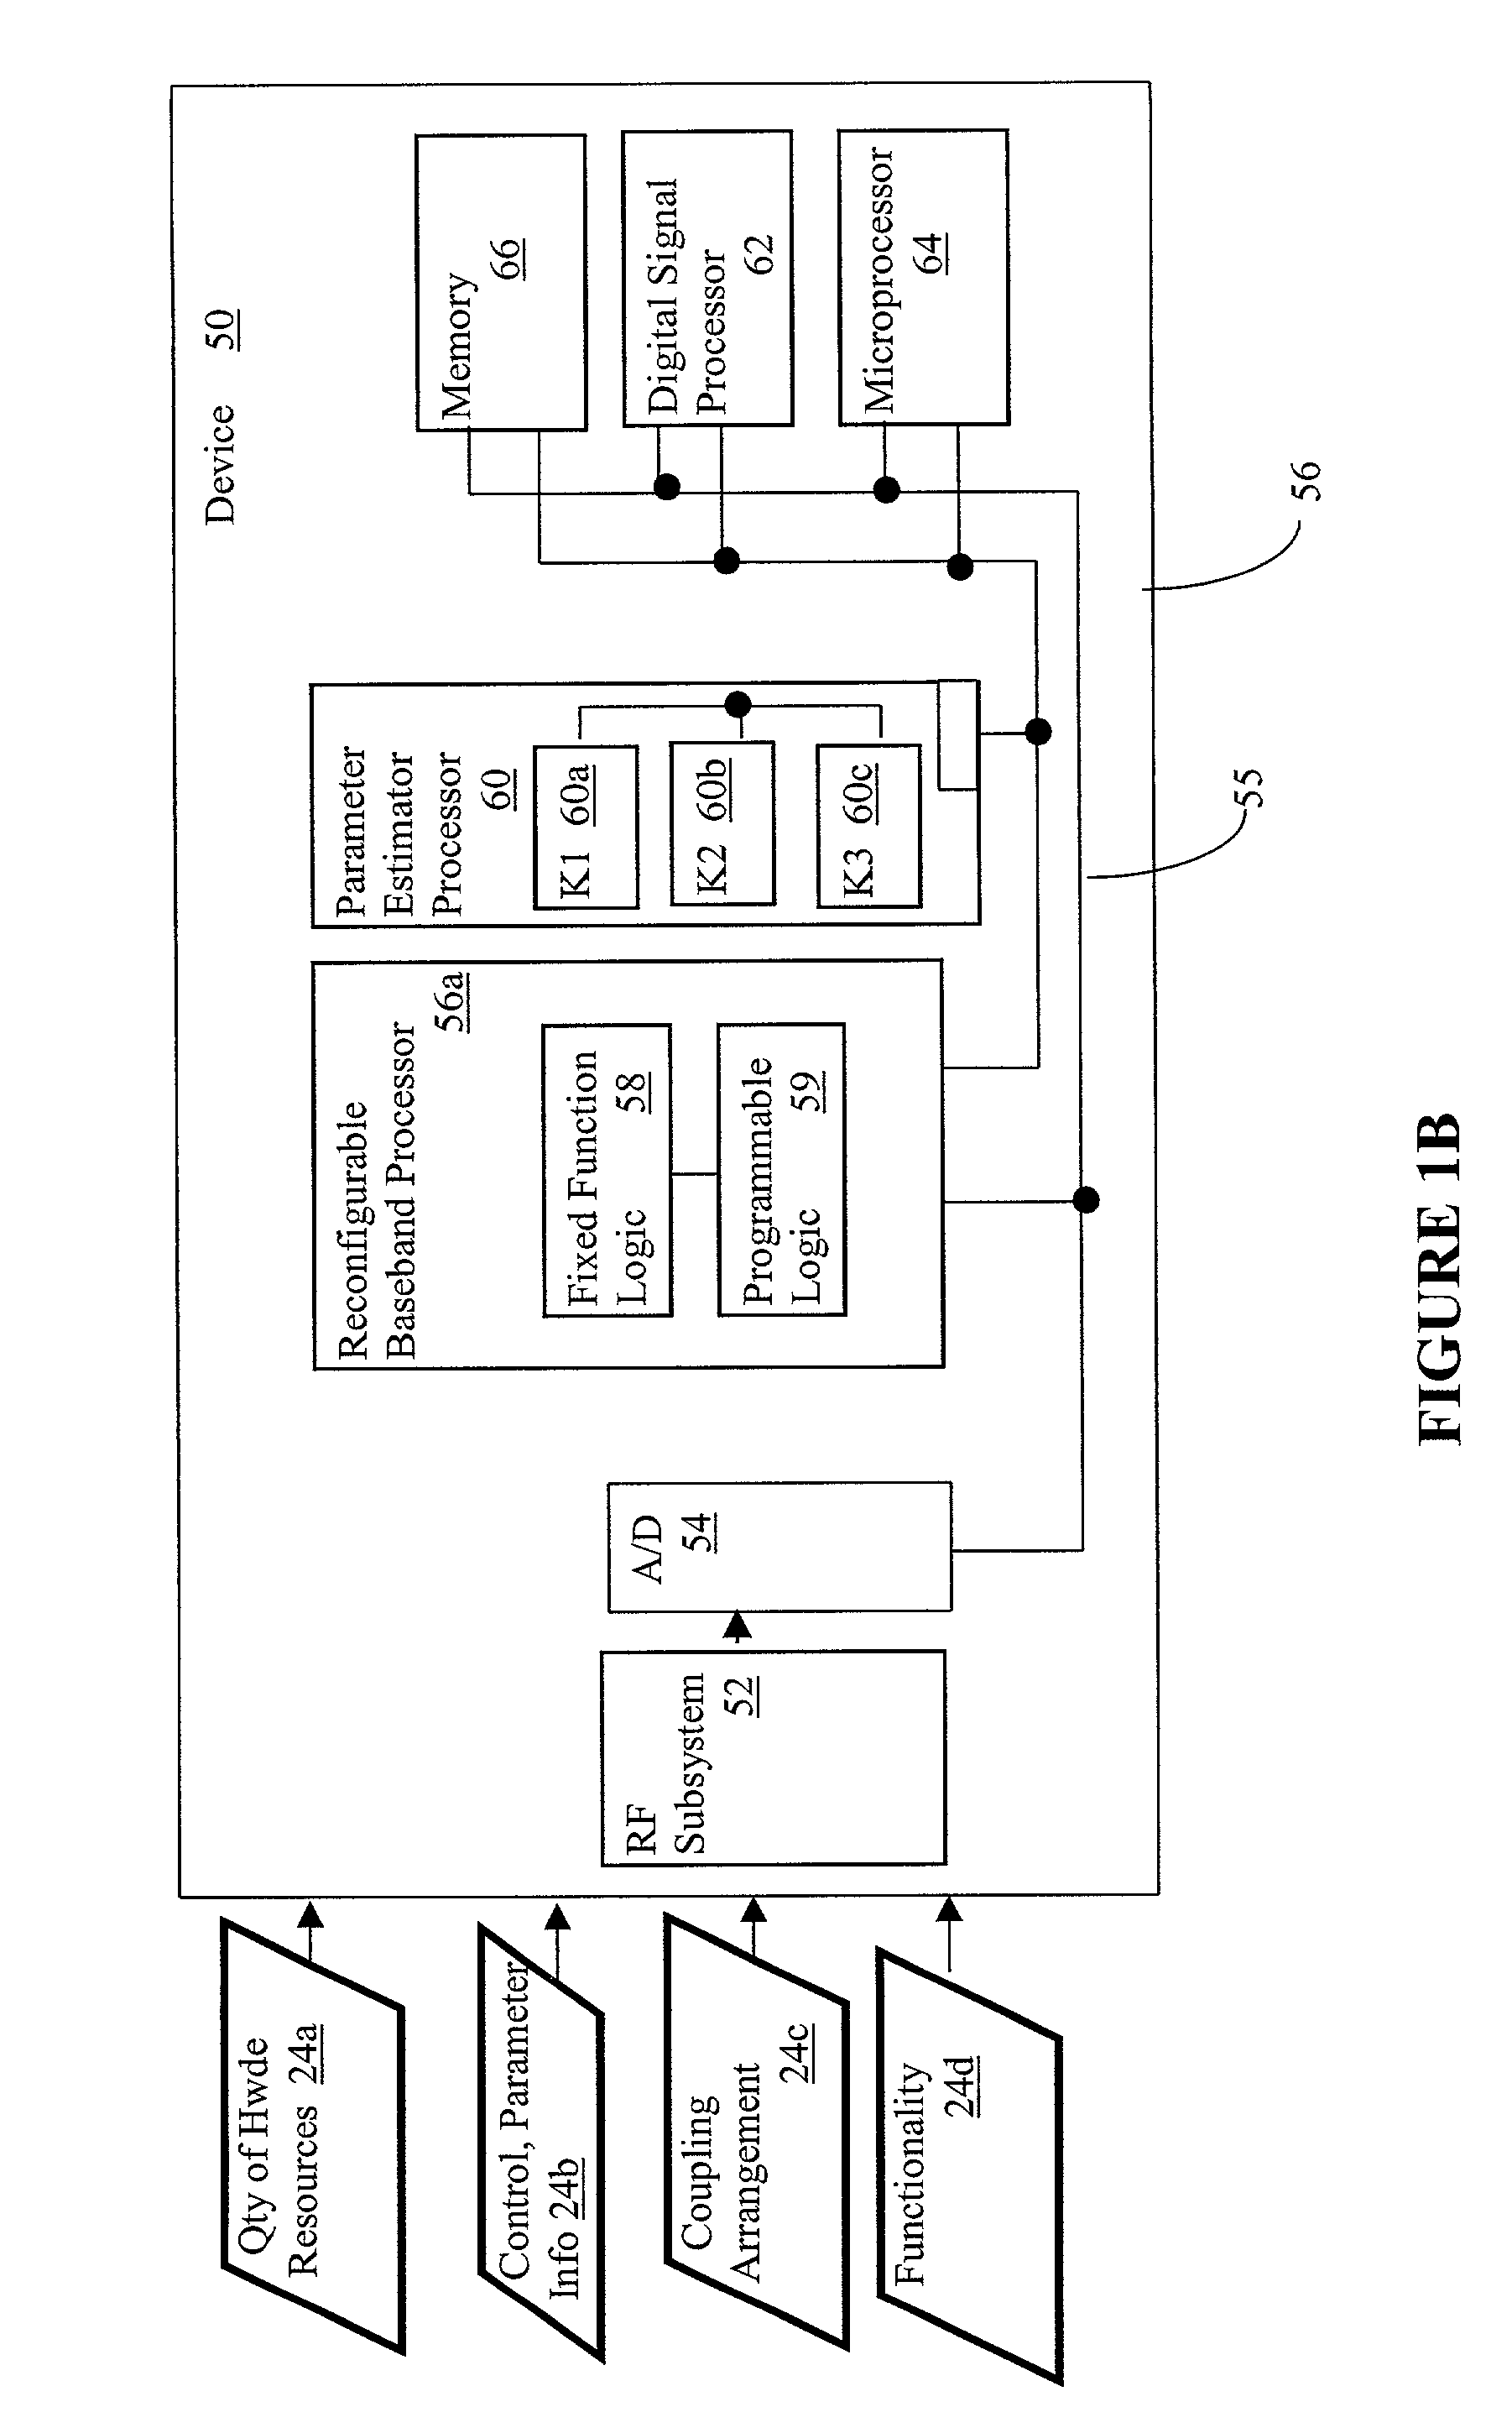 Efficient software download to configurable communication device